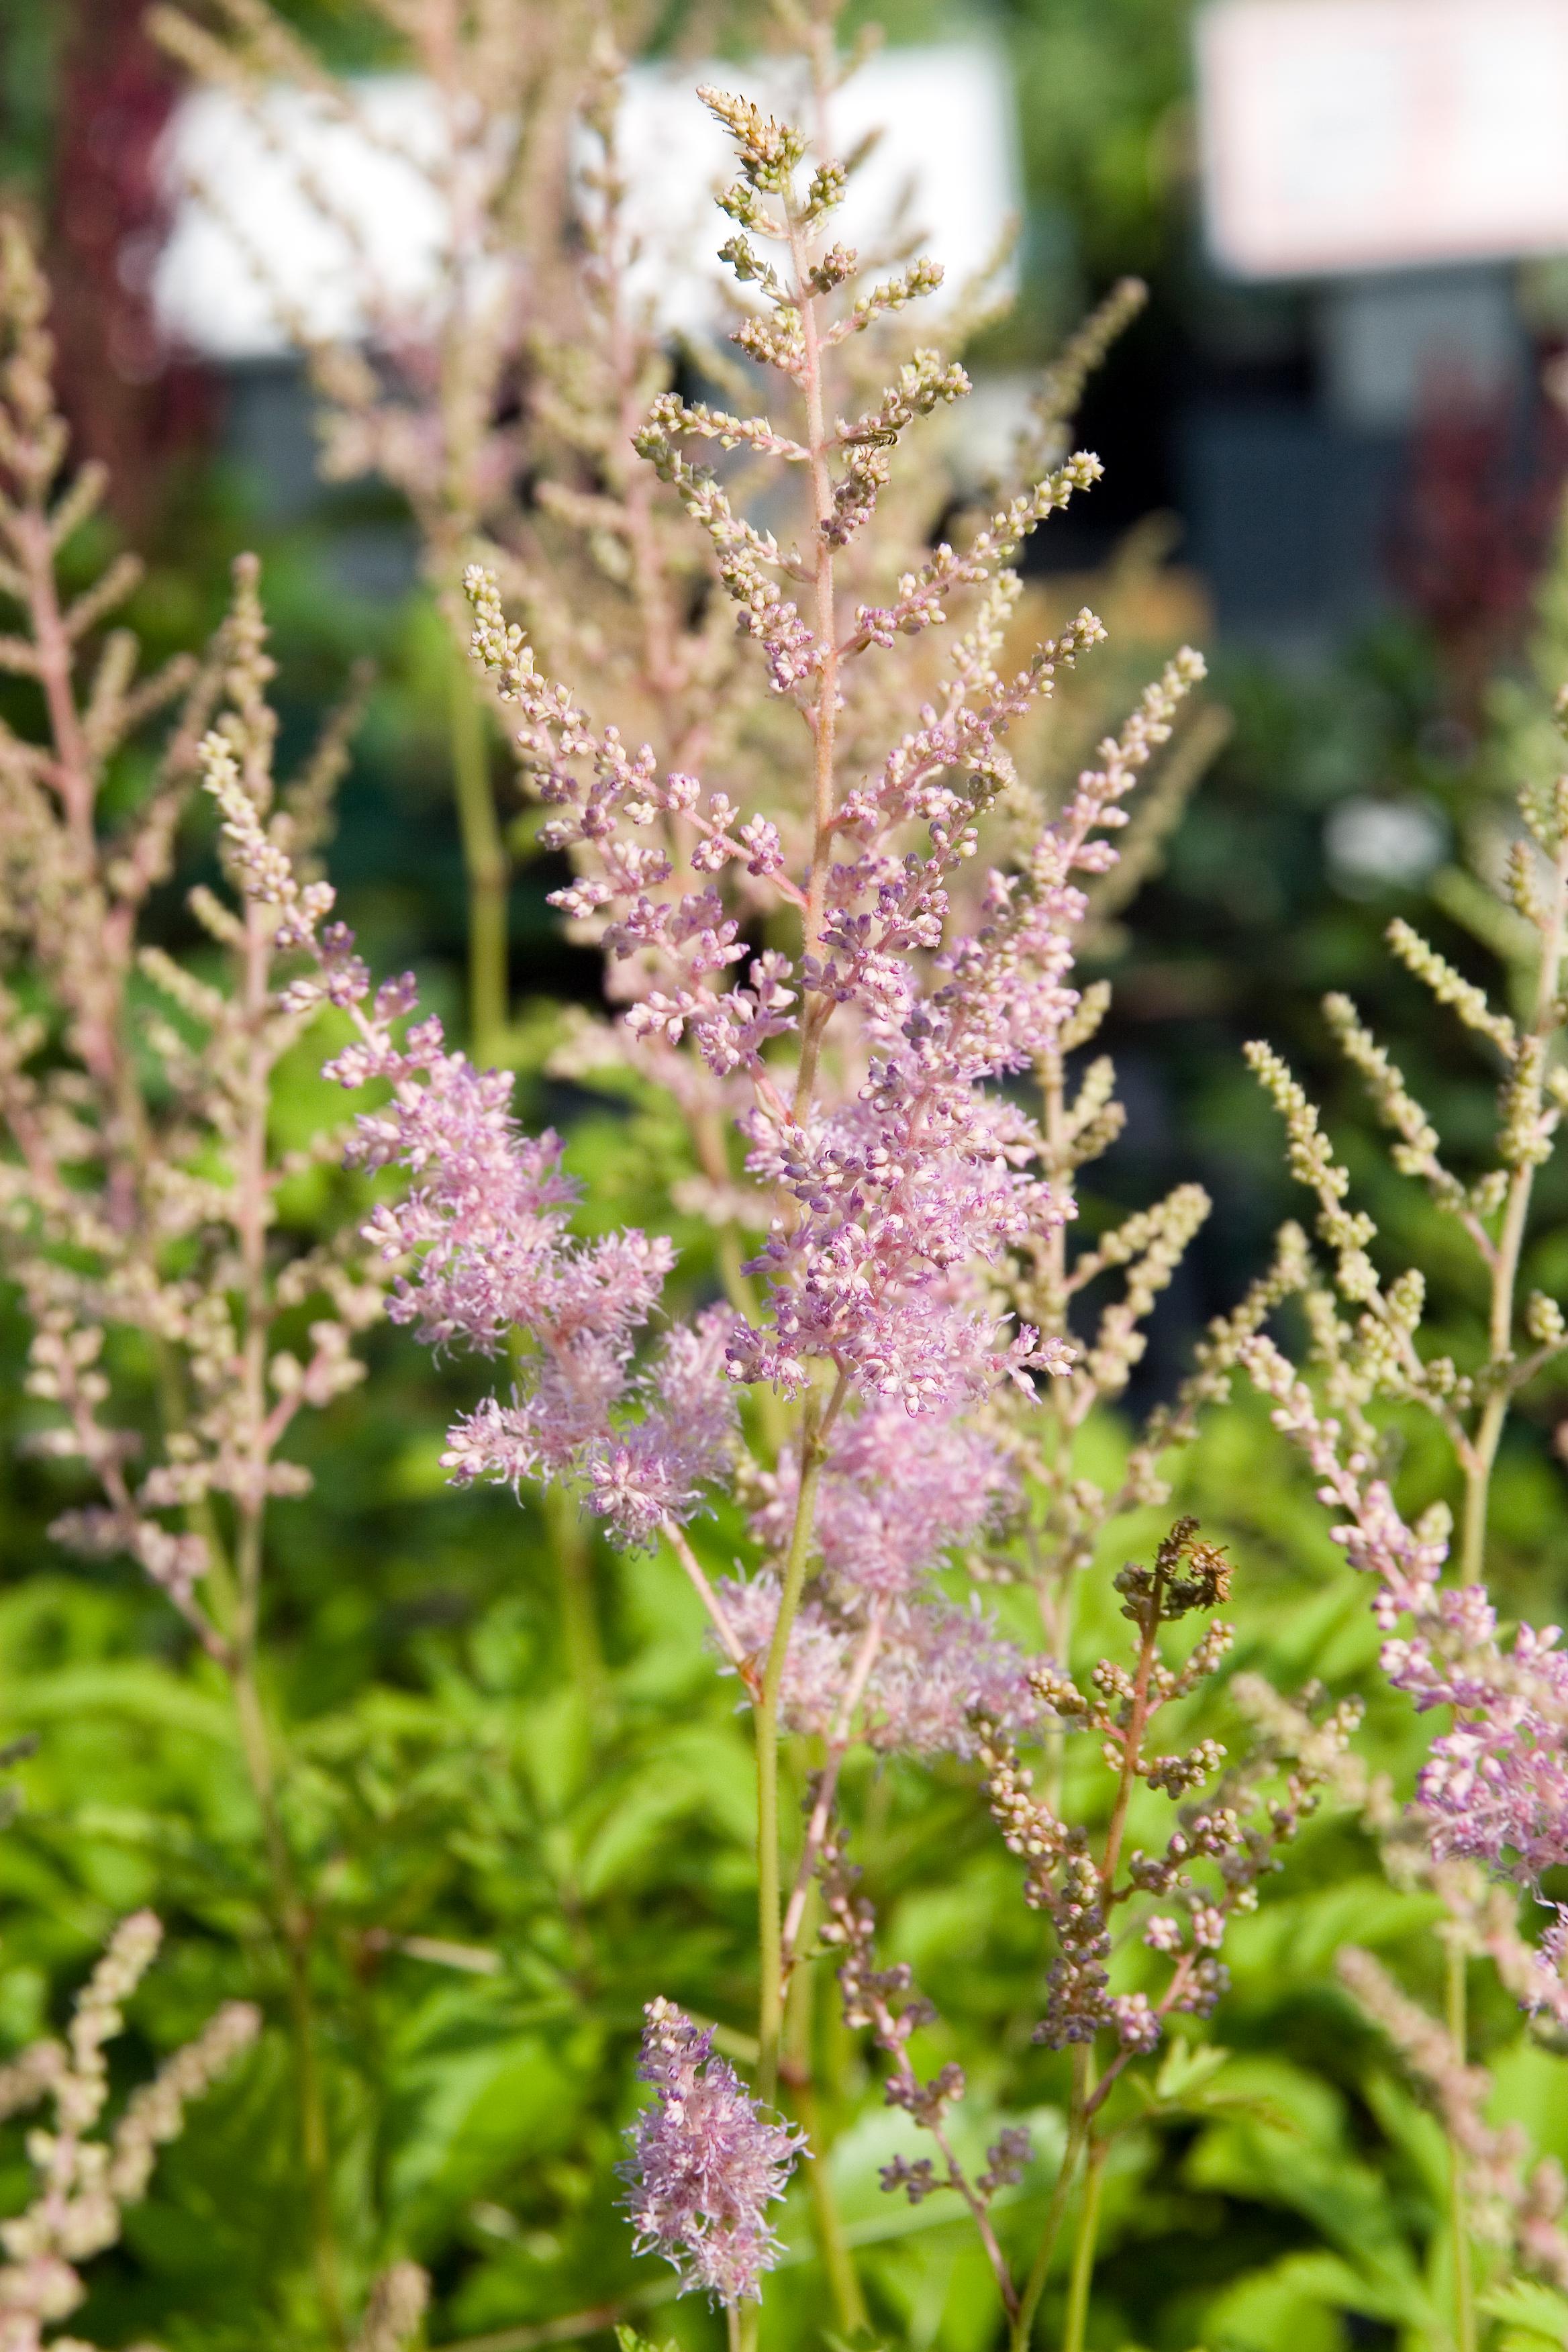 Lavender-white flower with pink-lime stems, off-white buds